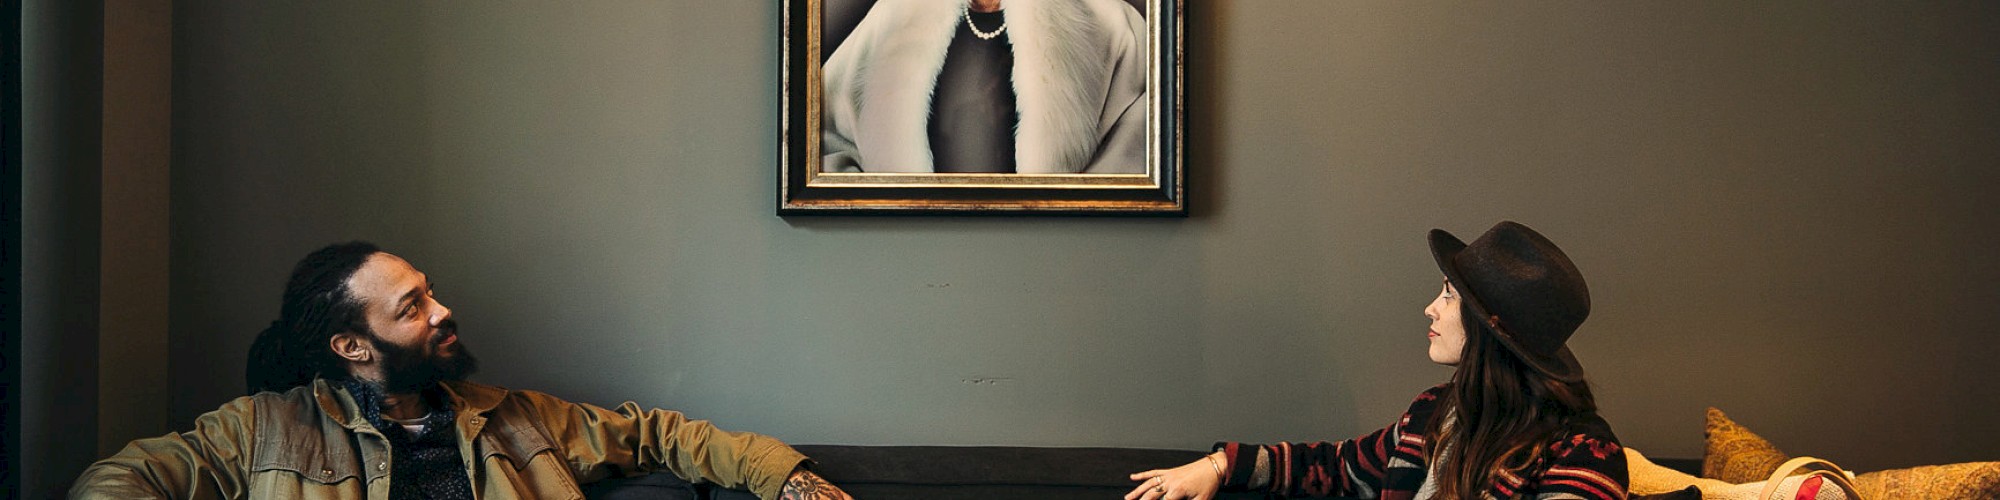 Two people sit on a couch, facing each other, with a portrait of a queen between them on the wall, and bags beside the woman.